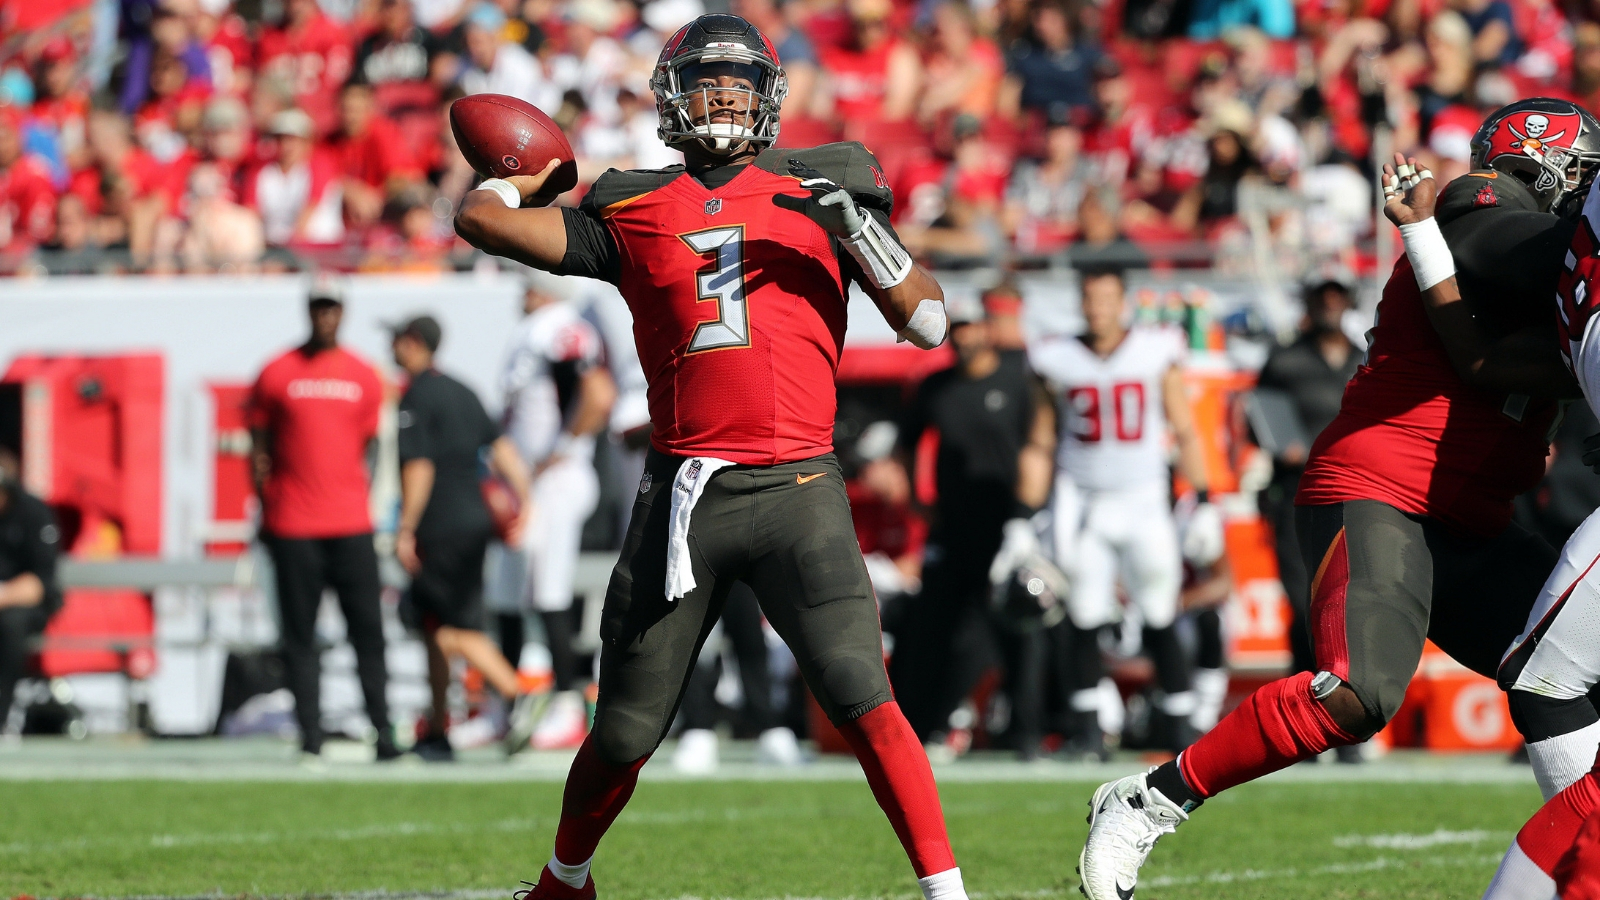 Jameis Winston's 4 TDs not enough as Buccaneers wrap up season with 34-32 loss to Falcons